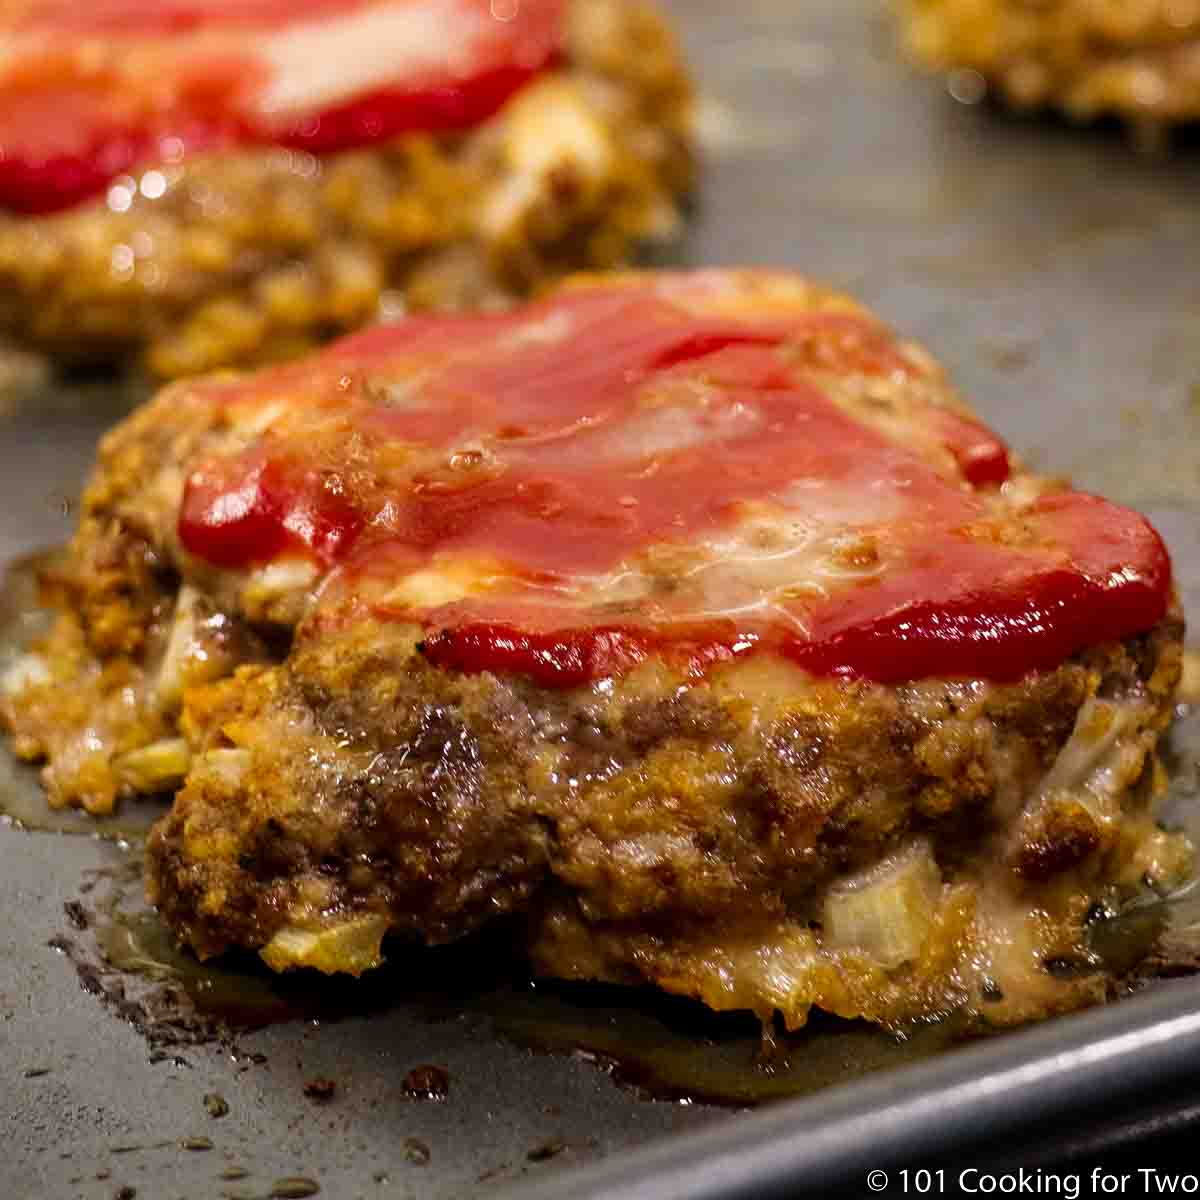 meatloaf burgers on plate